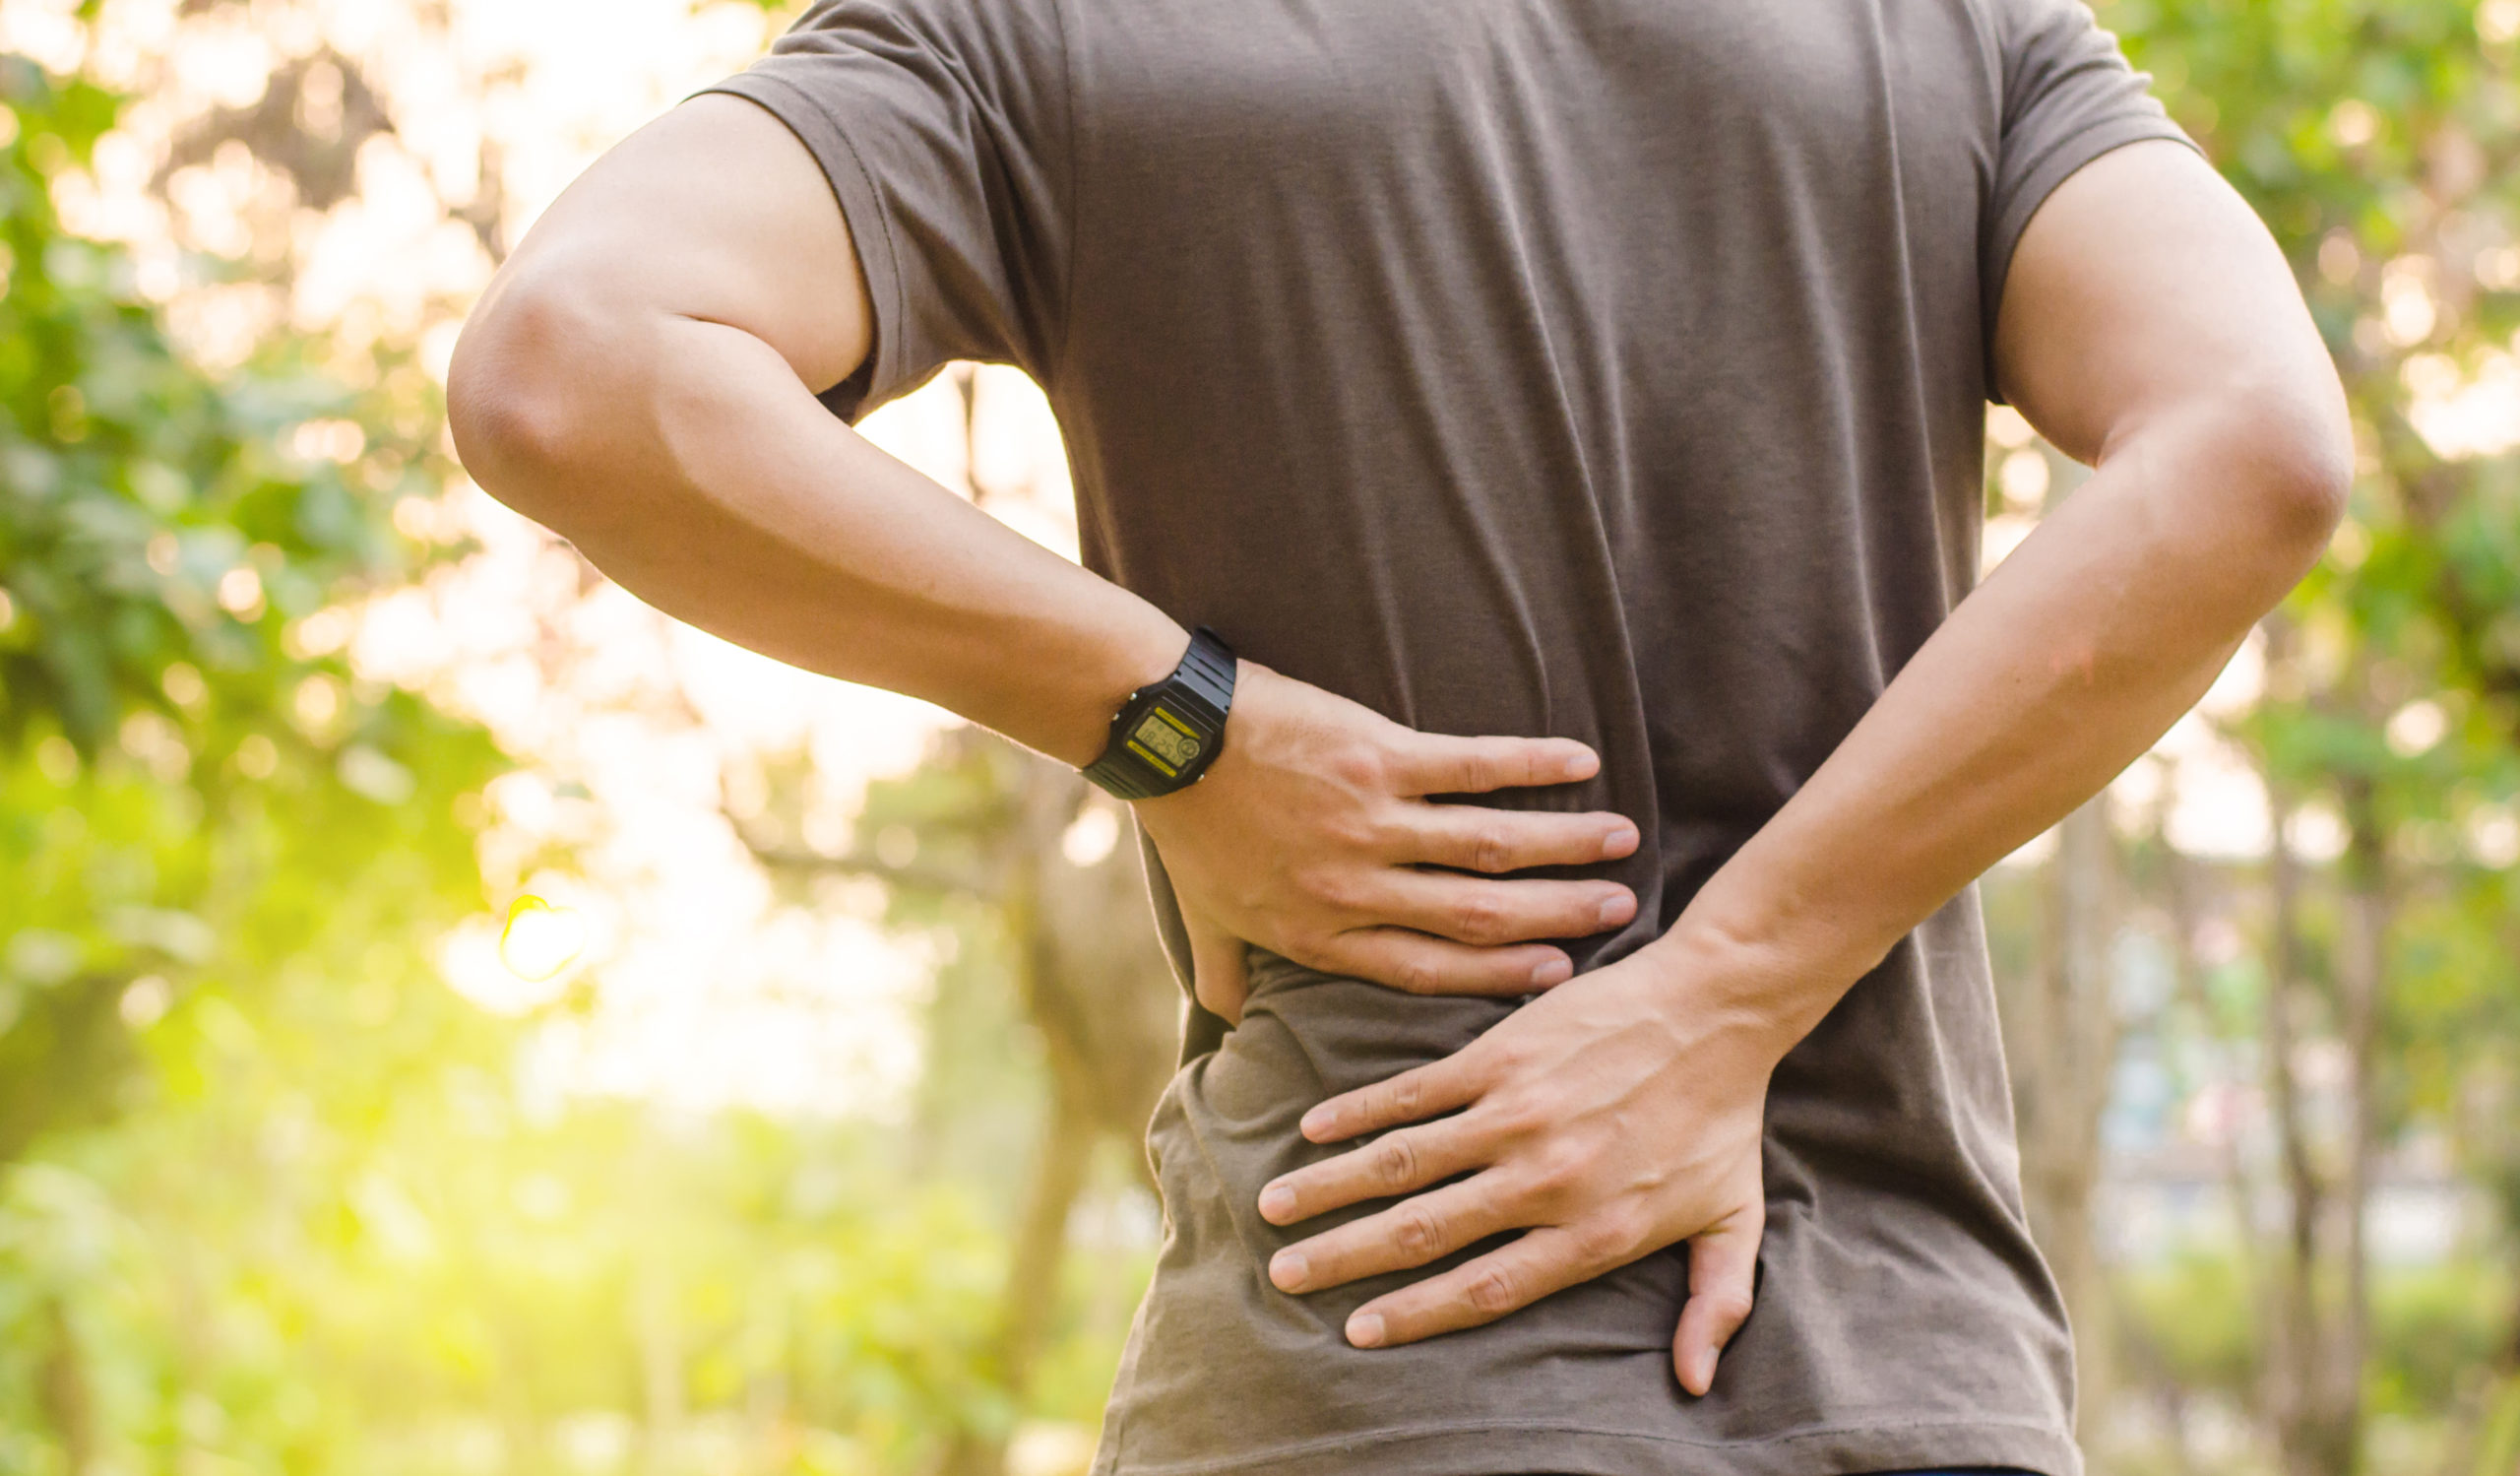 How to Heal a Strained Back